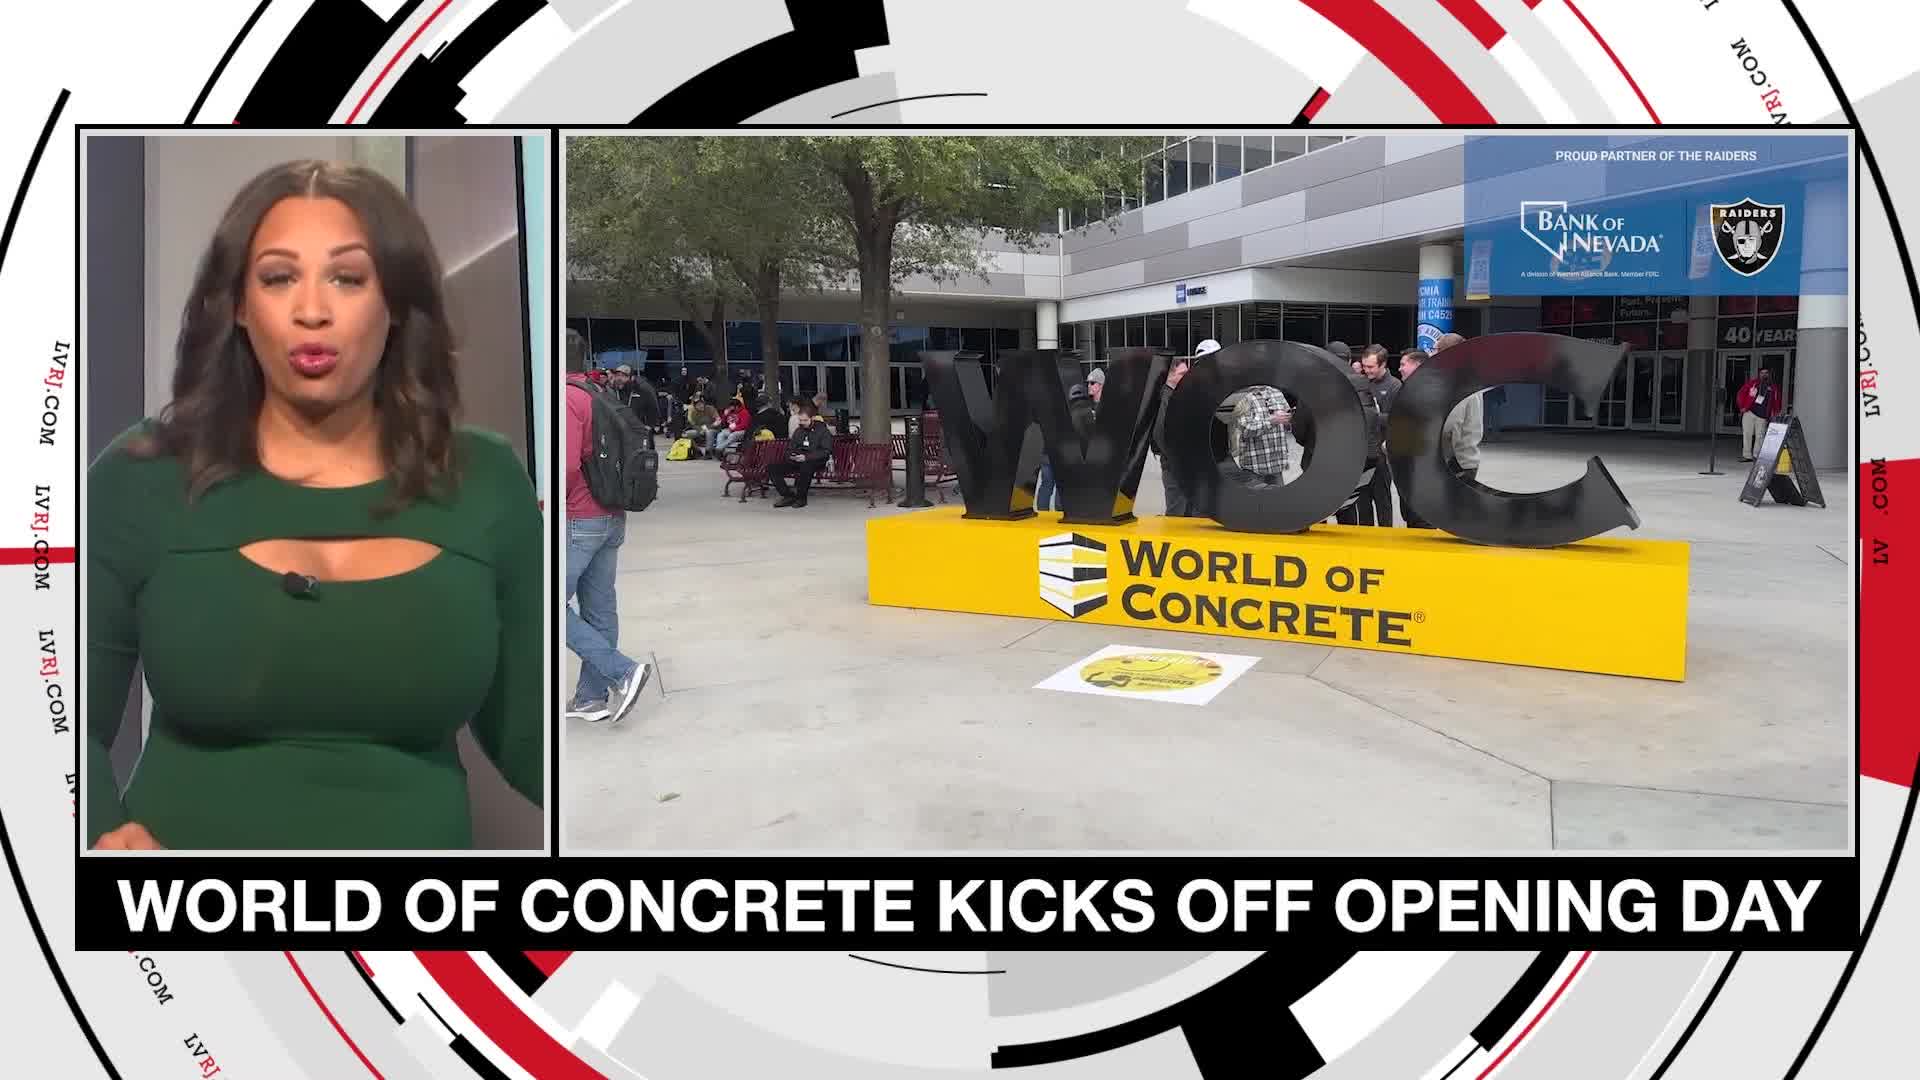 Thousands pour into Las Vegas for World of Concrete opening day